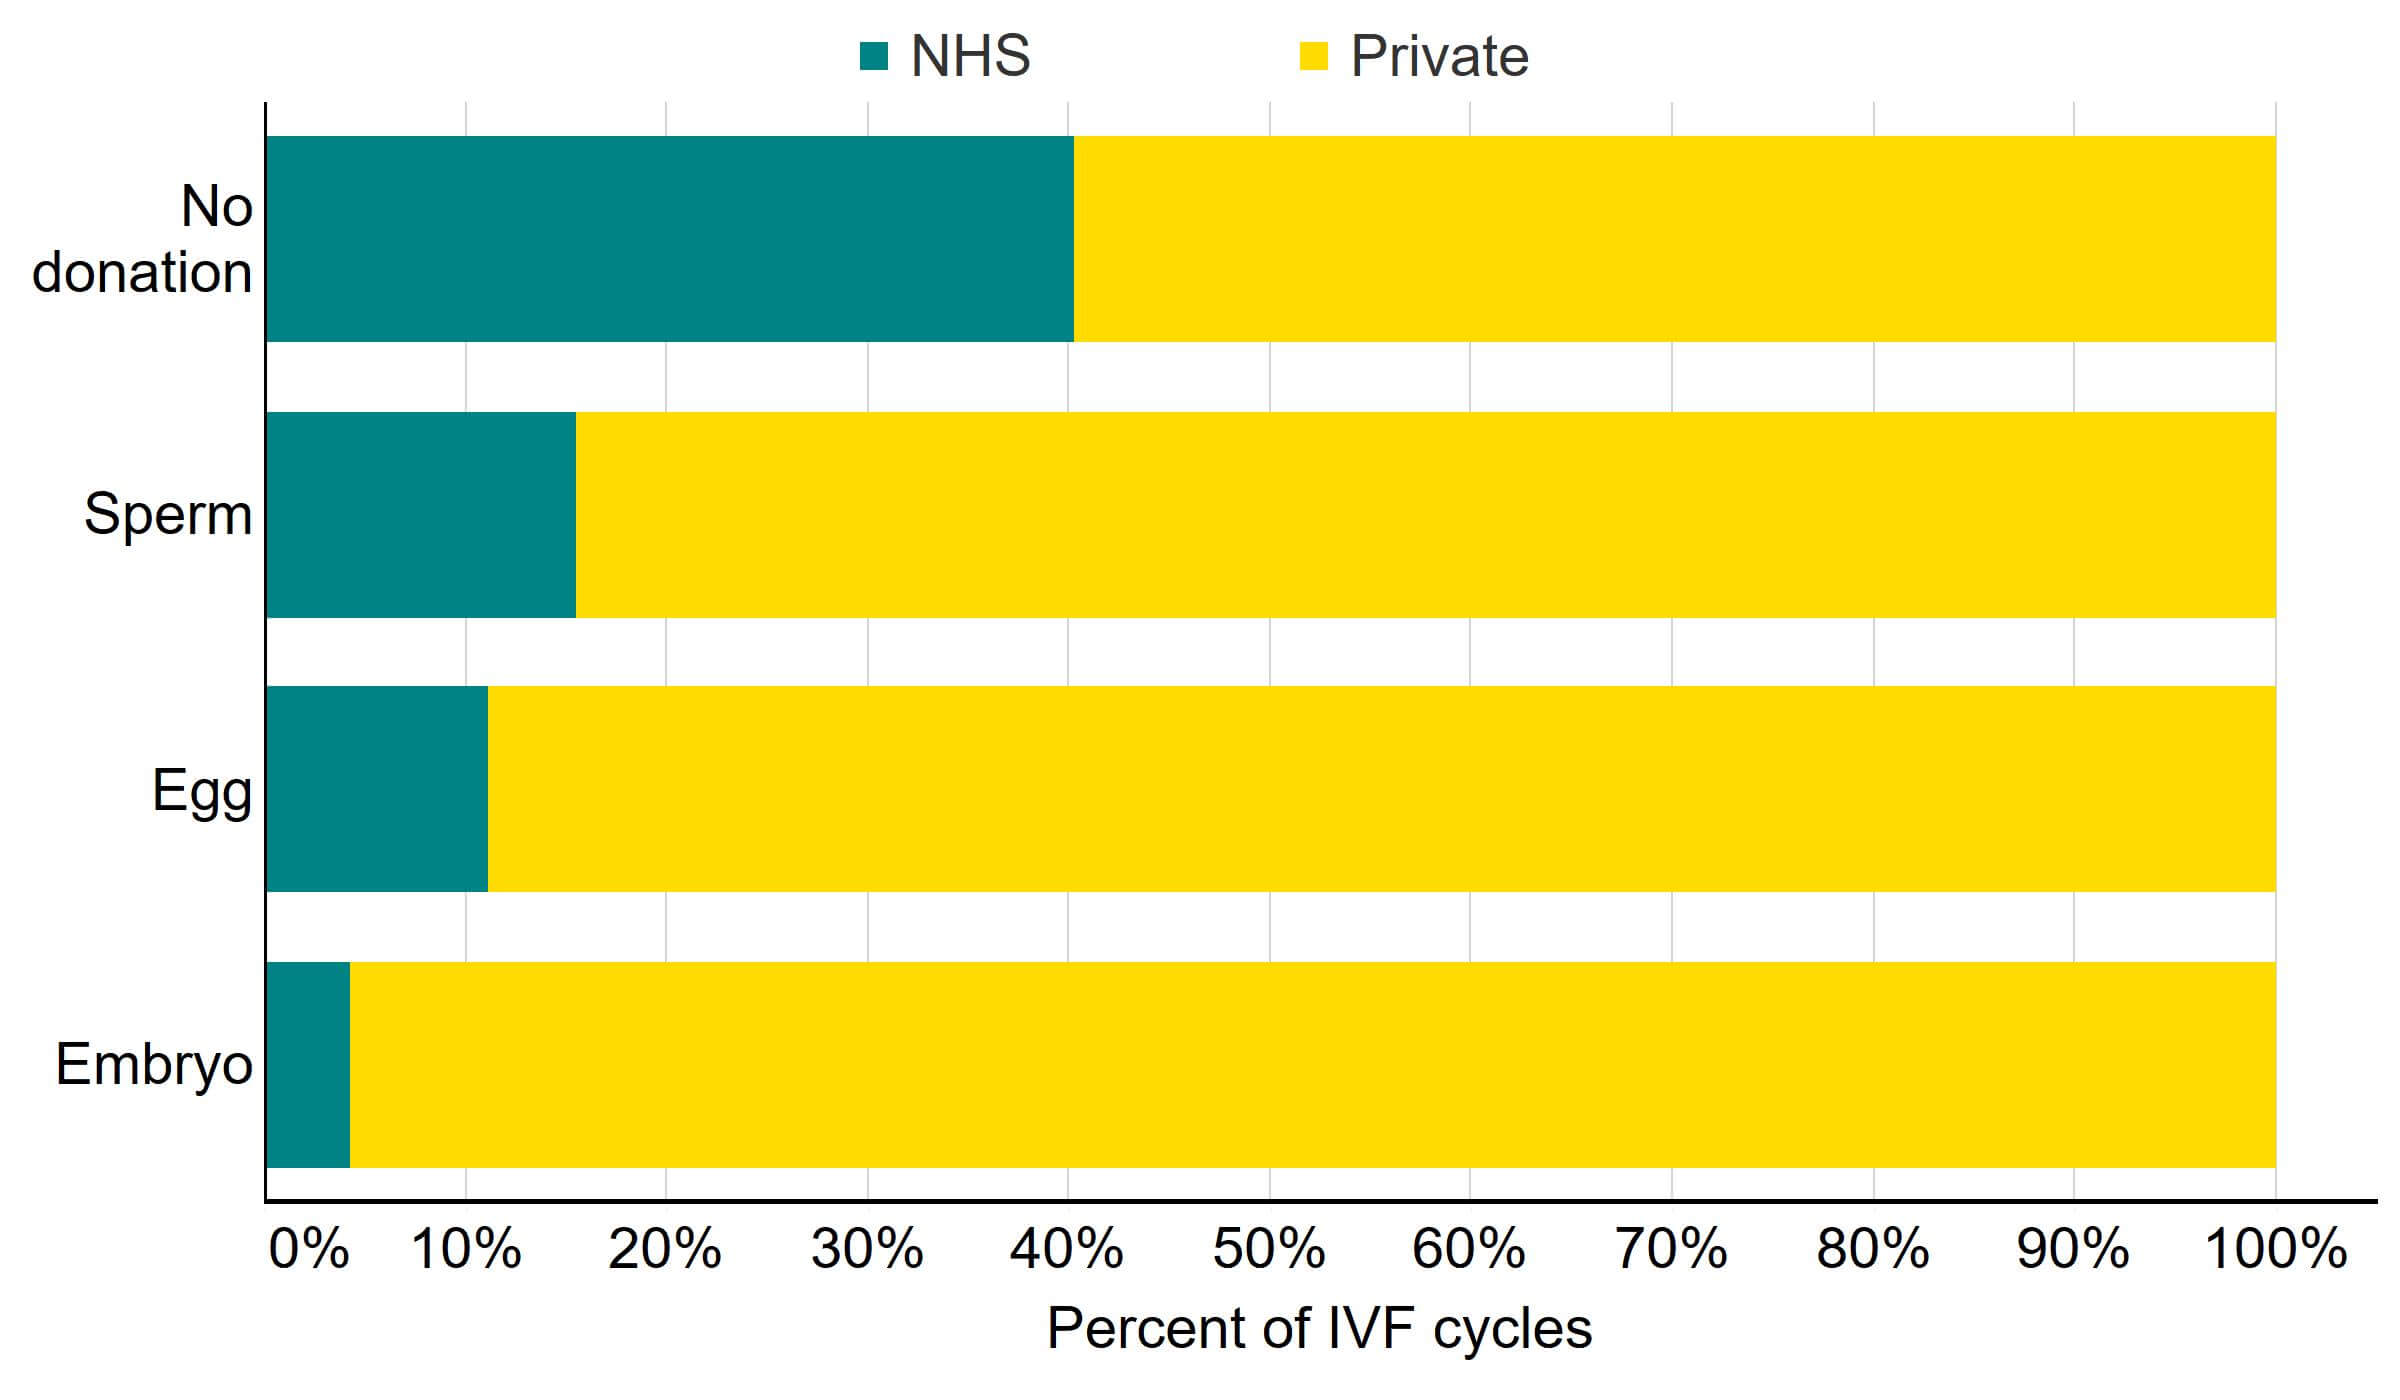 Stacked bar graph showing a higher proportion of NHS funding for treatments not using donor sperm, eggs or embryos.